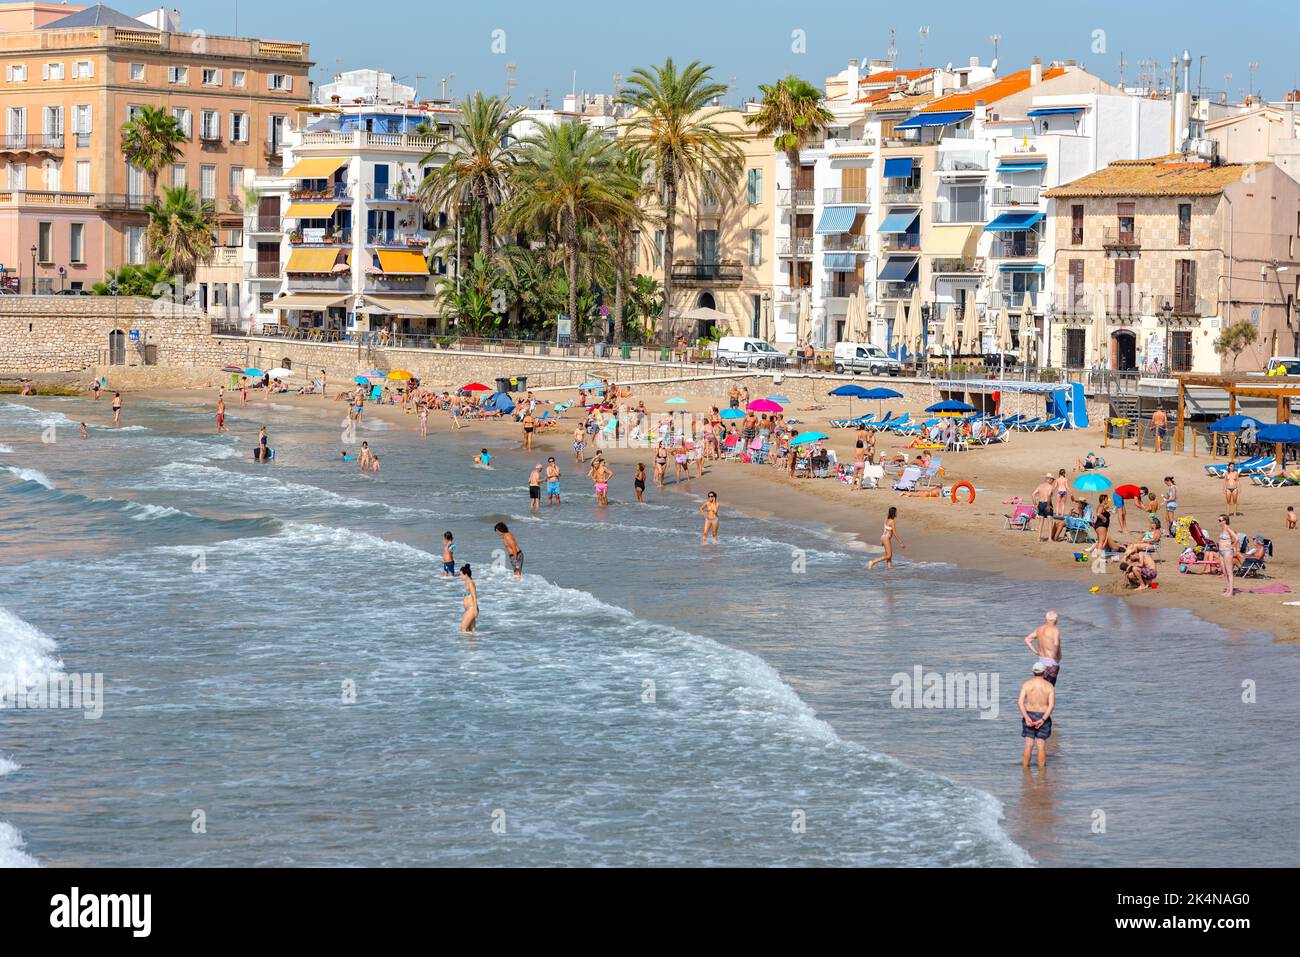 Sitges, Catalonia, Spain: July 28, 2020: People in the beach in Sitges in summer 2020. Stock Photo